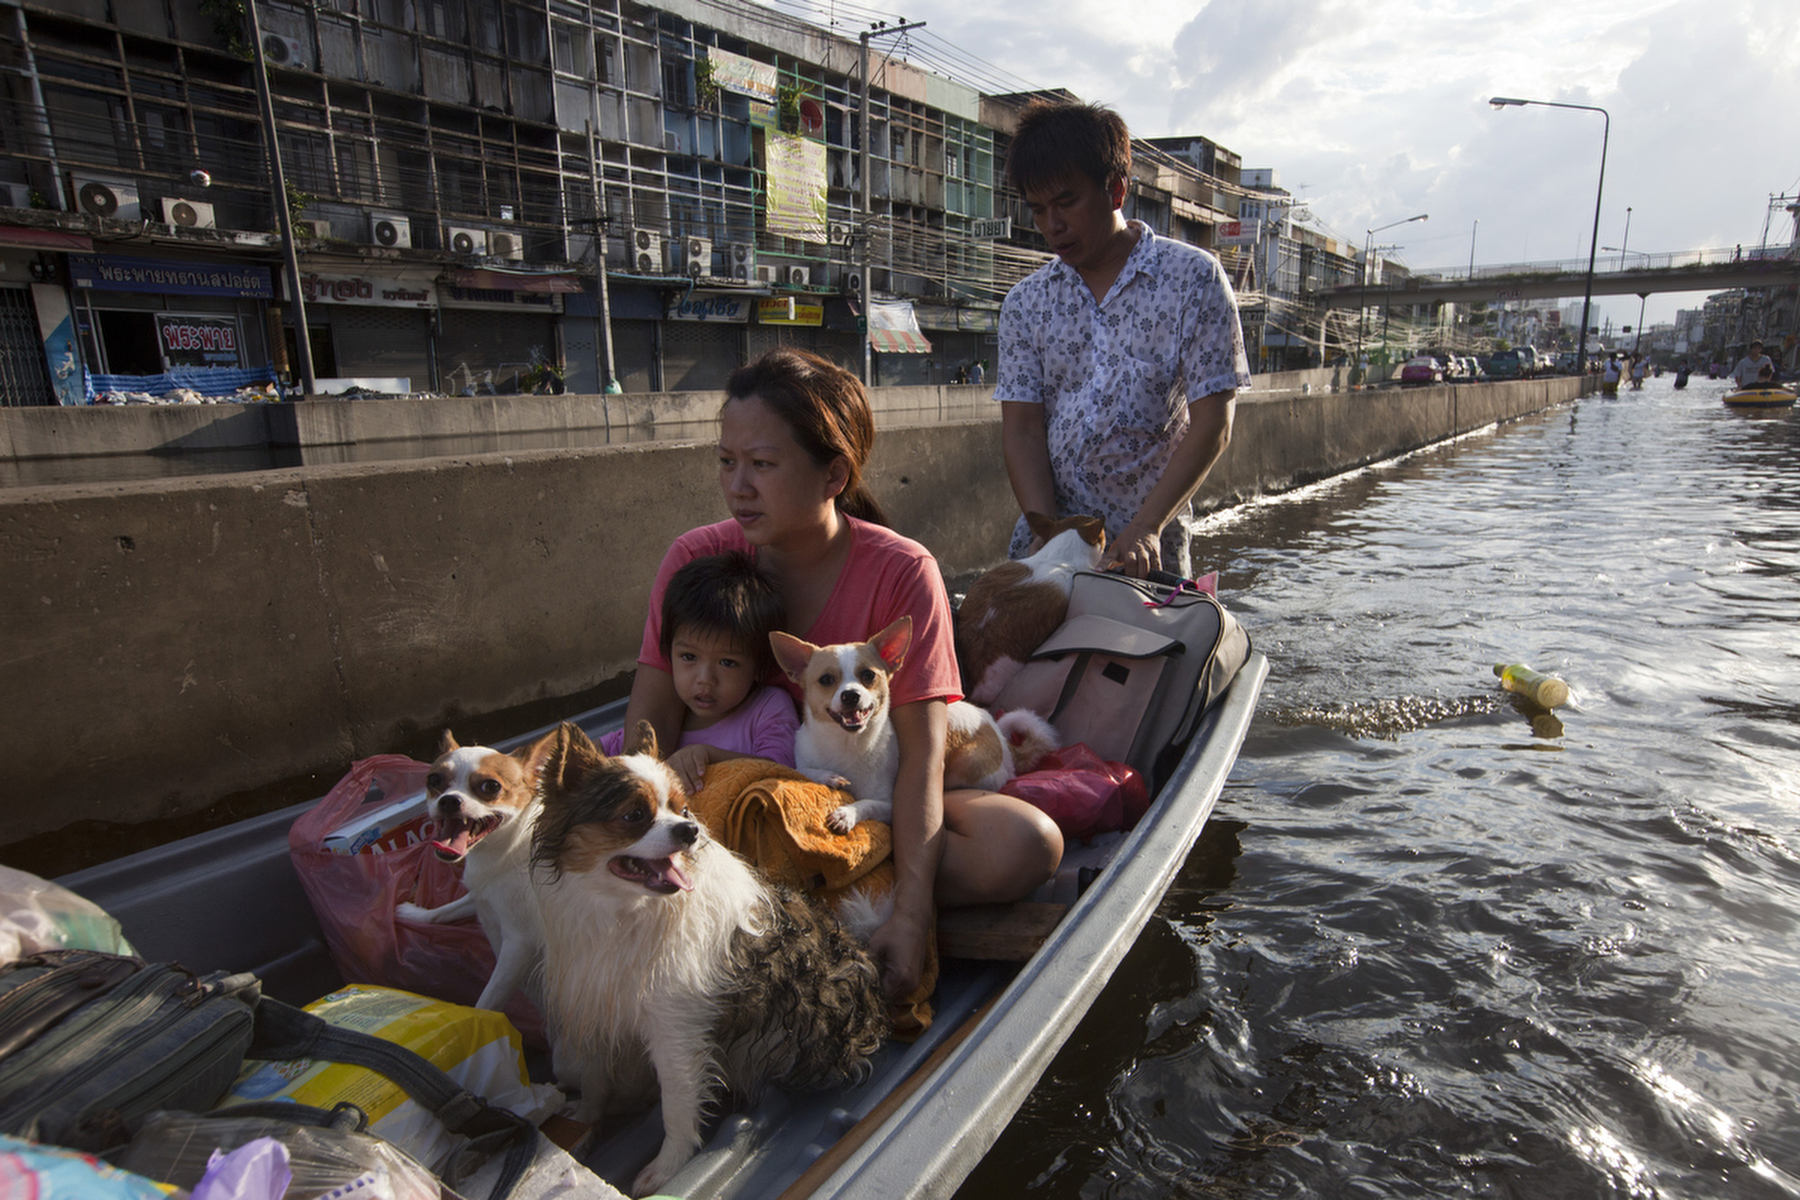 BANGKOK,THAILAND - OCTOBER 29: A Thai family evacuates with all their dogs in a boat through a flooded neighborhood near the Chayo Praya river as rising waters threaten parts of the capitol city October 29, 2011 in Bangkok, Thailand. Hundreds of factories have been closed in the central Thai province of Ayutthaya and Nonthaburi. Thailand is experiencing the worst flooding in over 50 years which has affected more than nine million people. Over 400 people have died in flood-related incidents since late July according to the Department of Disaster Prevention and Mitigation.(Photo by Paula Bronstein /Getty Images)